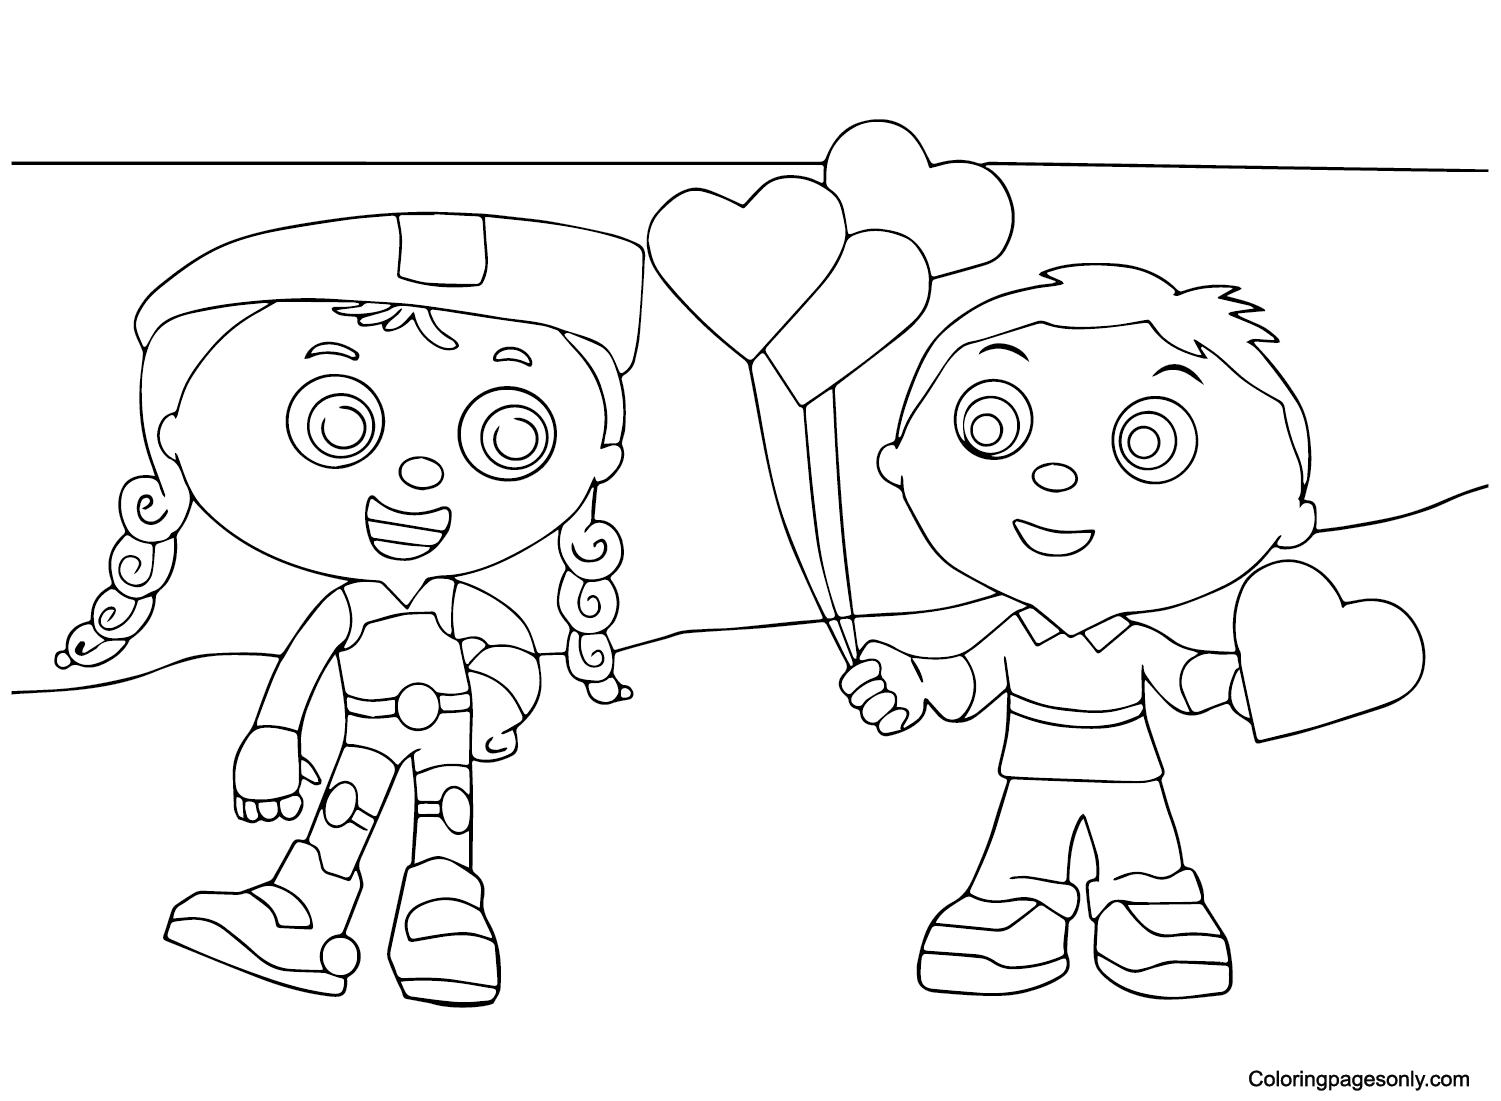 Wonder Red with Super Why Coloring Page